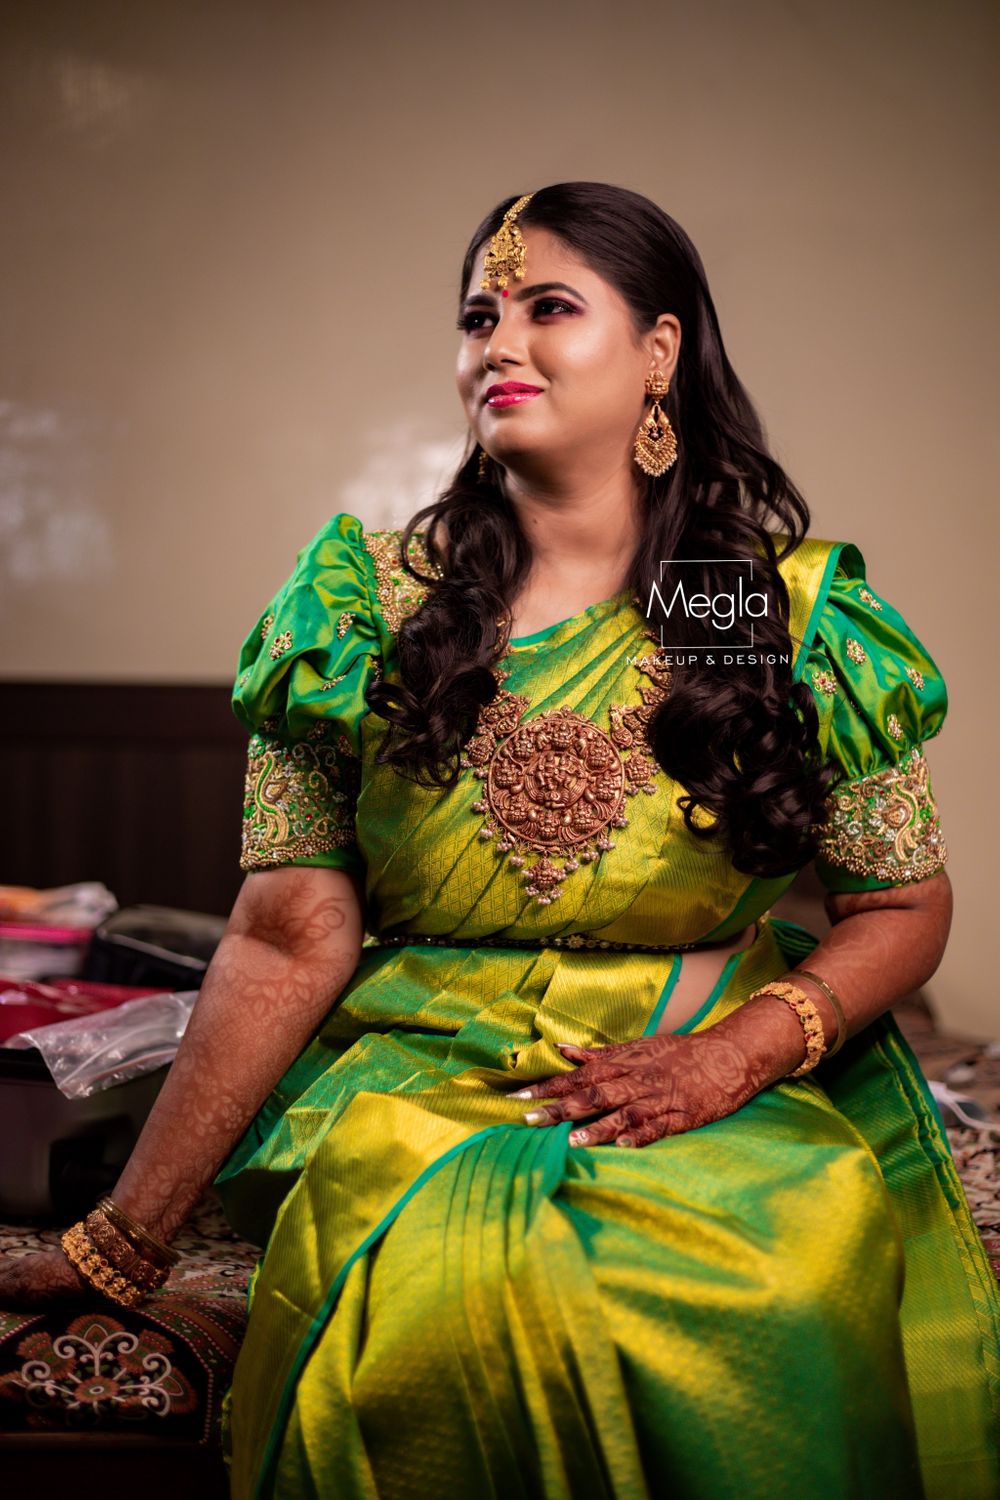 Photo From Muhurtham look - By Megla Makeup and Design